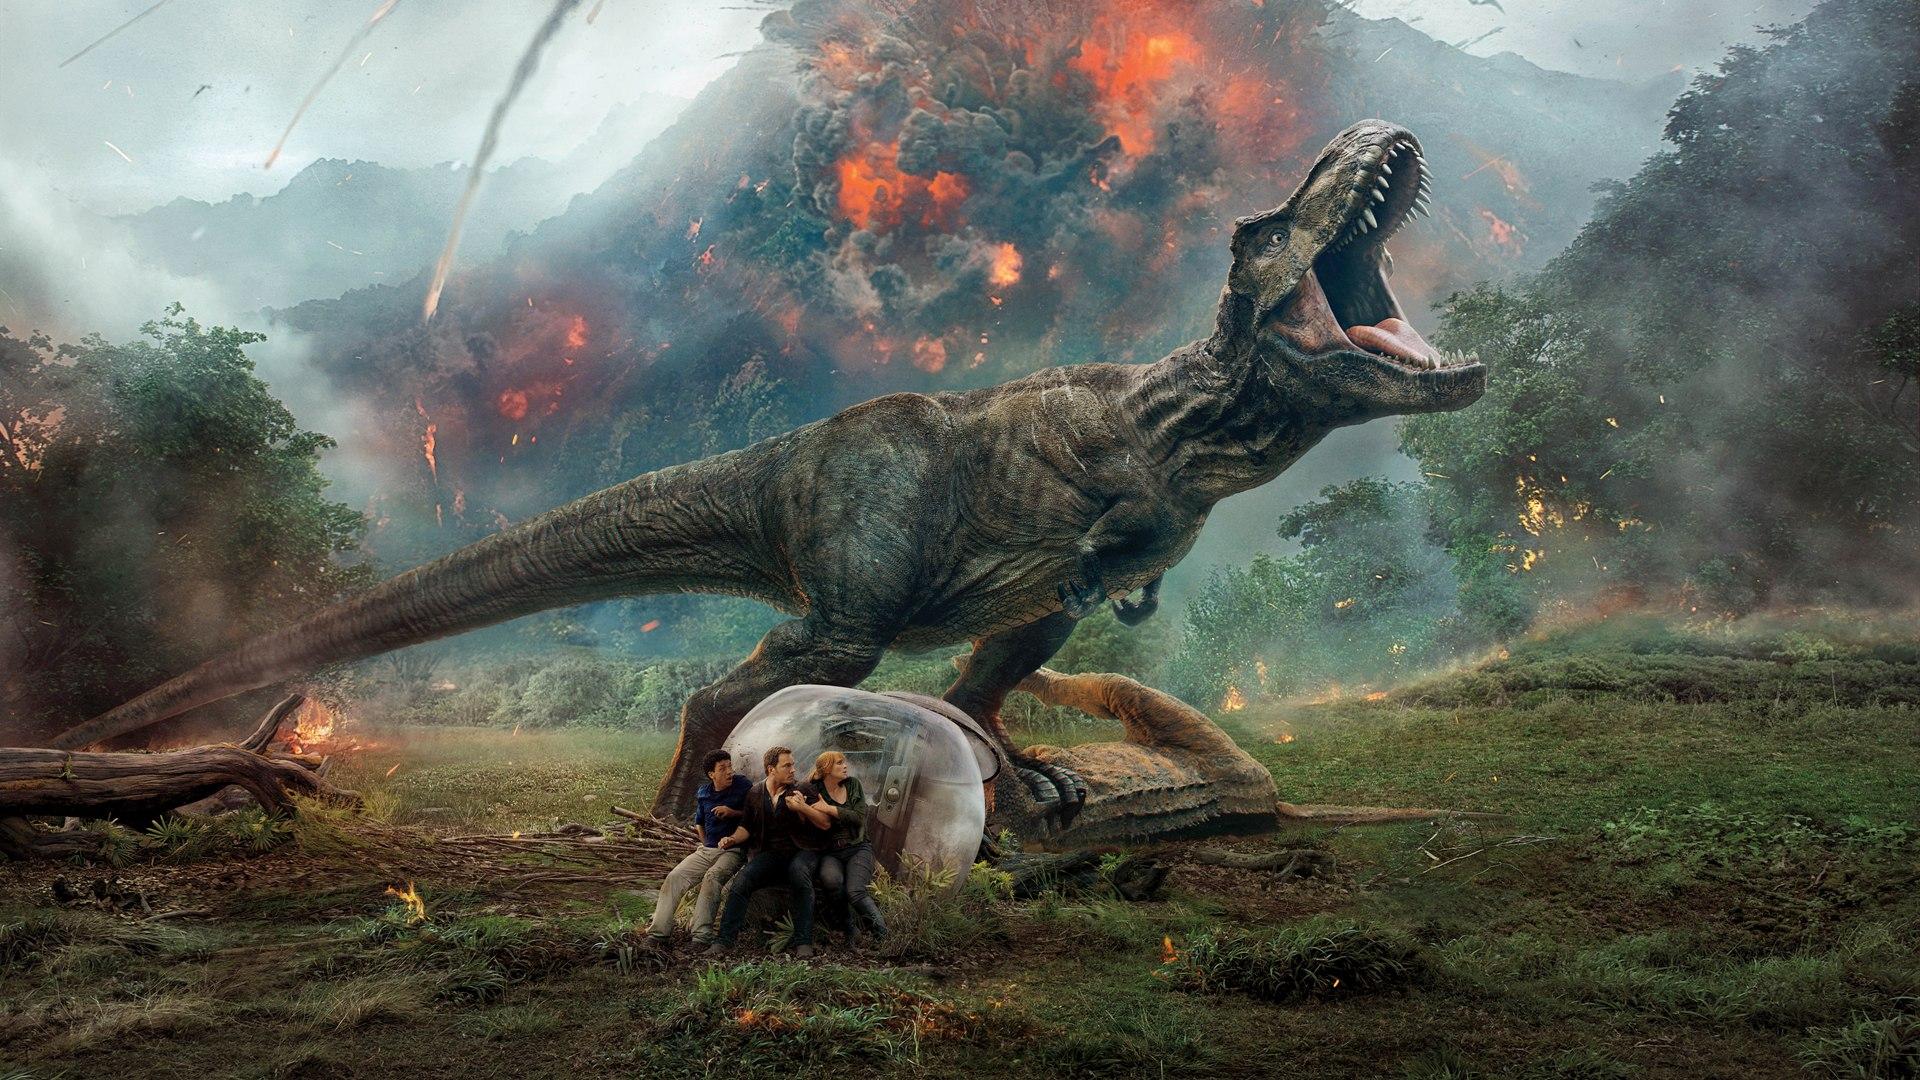 Jurassic World Fallen Kingdom Review (2018). Running Out Of Stories?